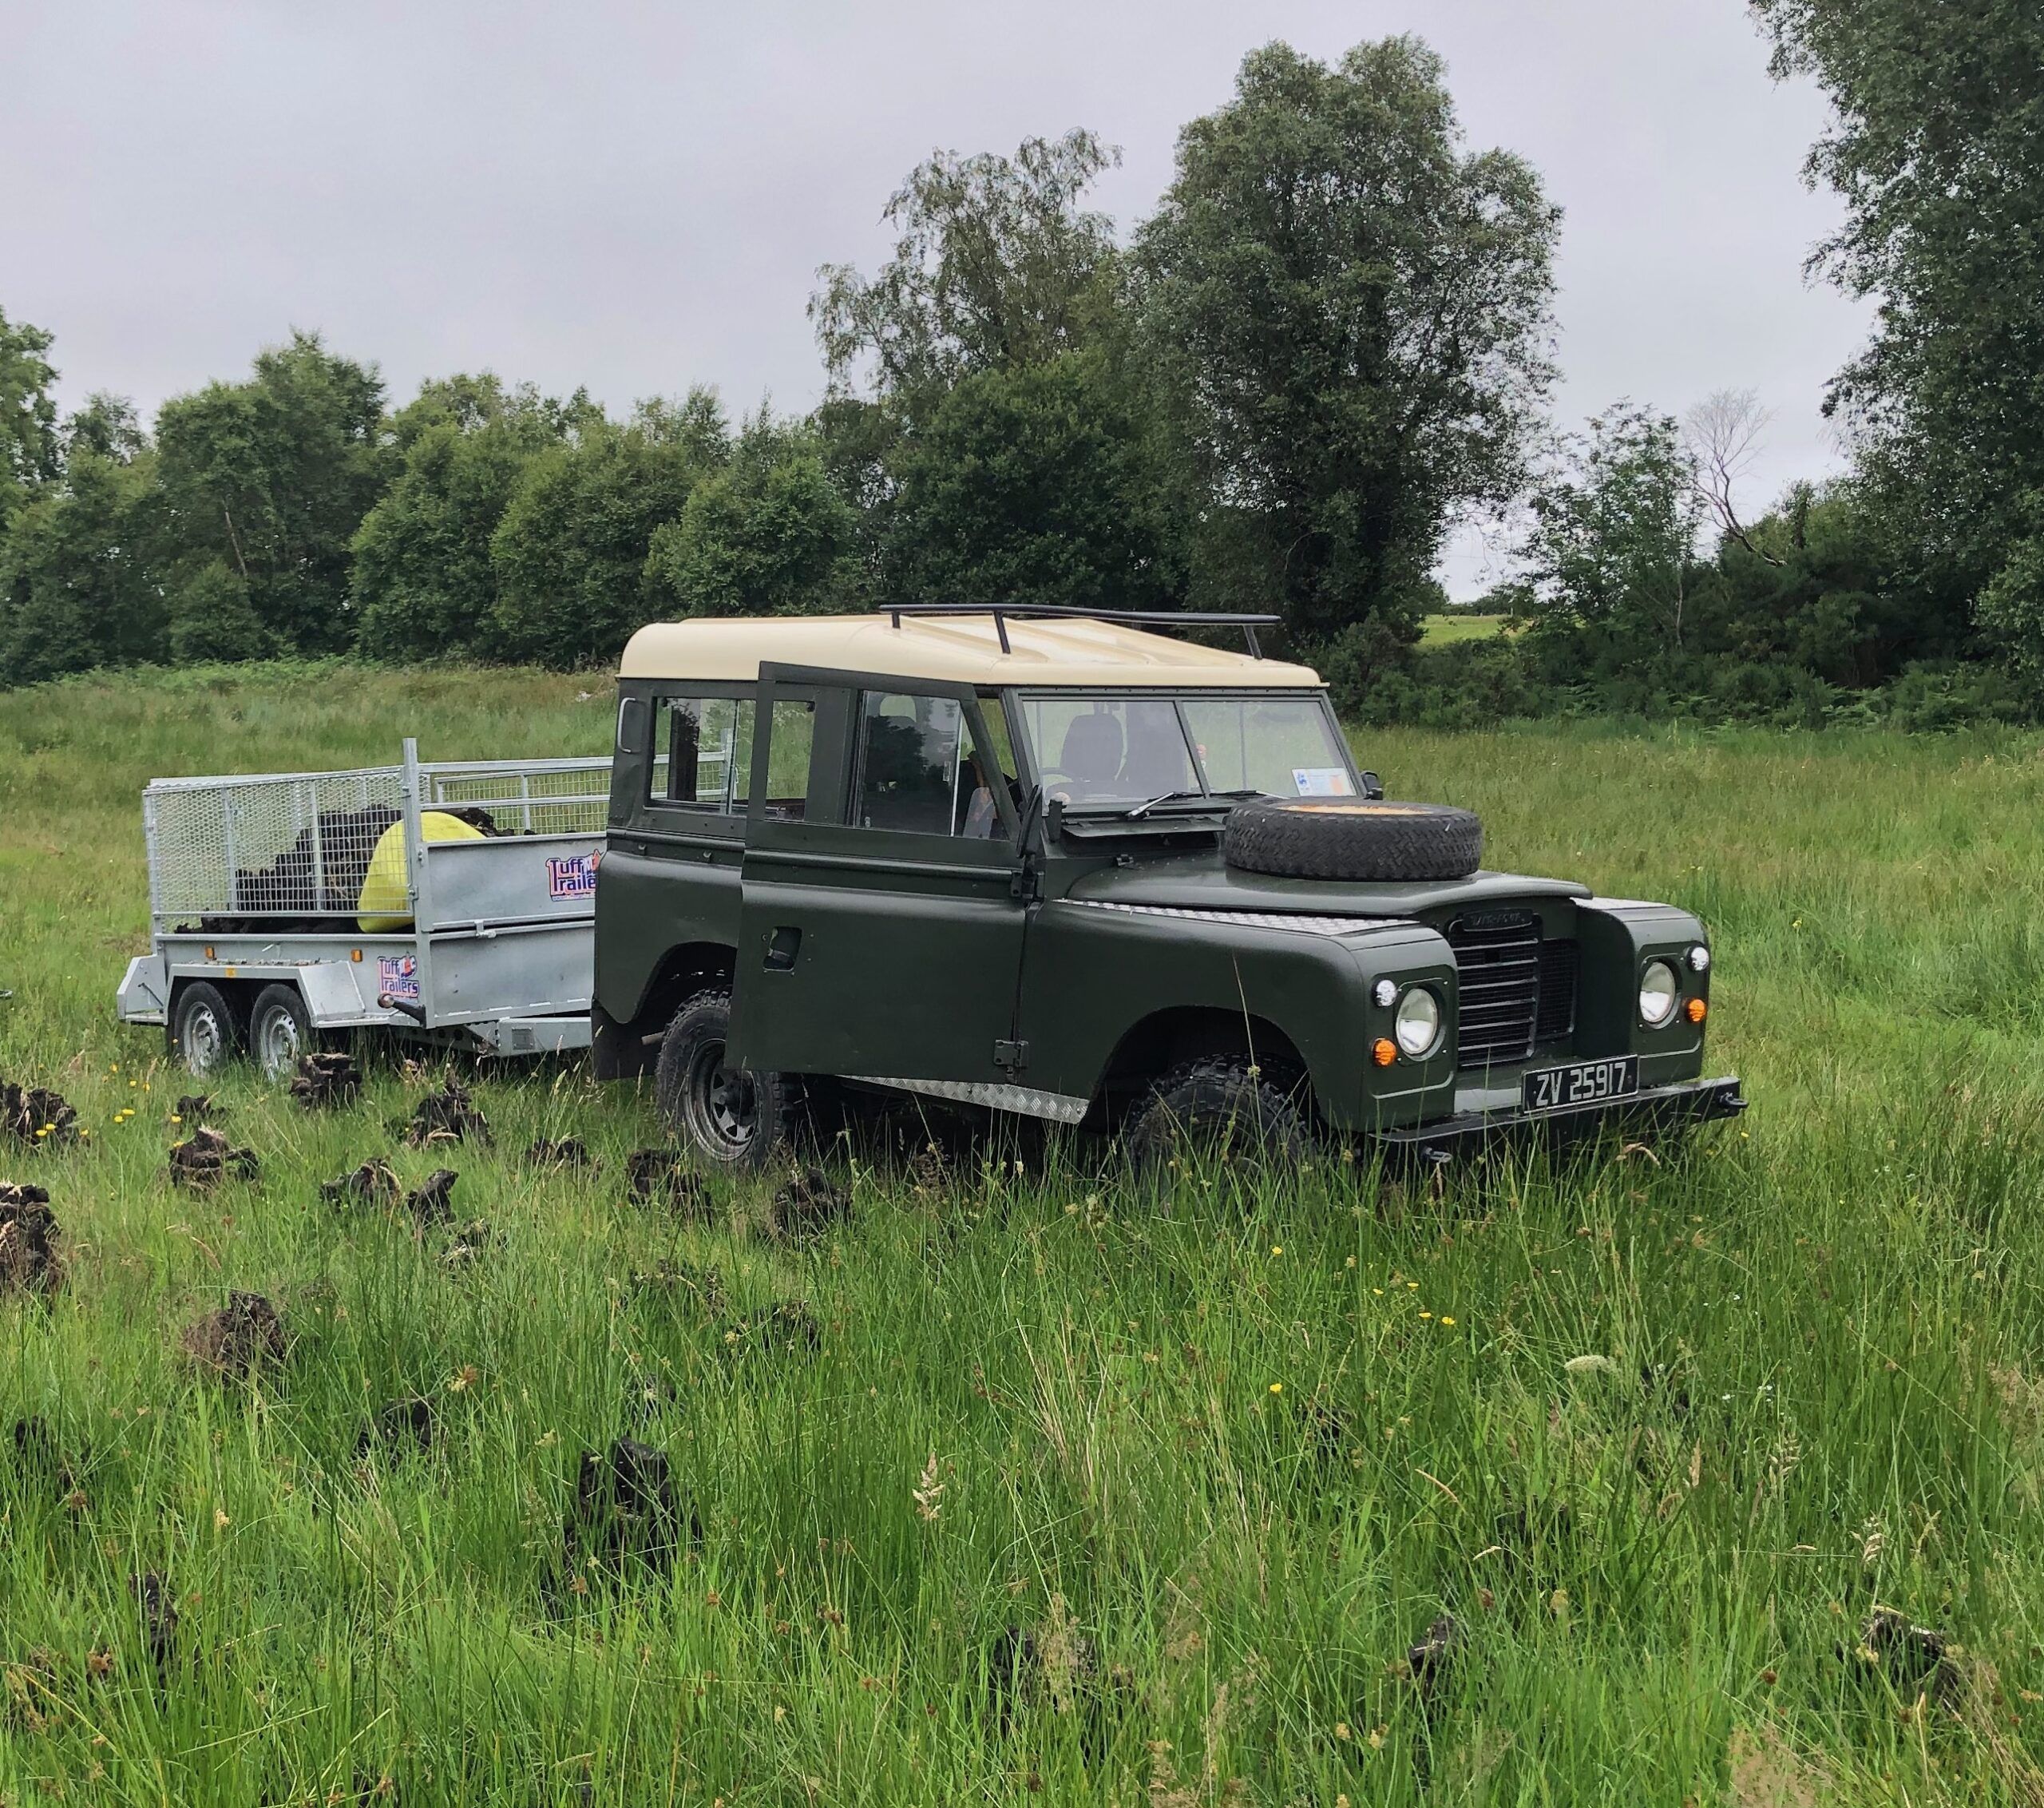 Getting the job done – 1979 Land Rover Series III | Season 3 – Episode 11